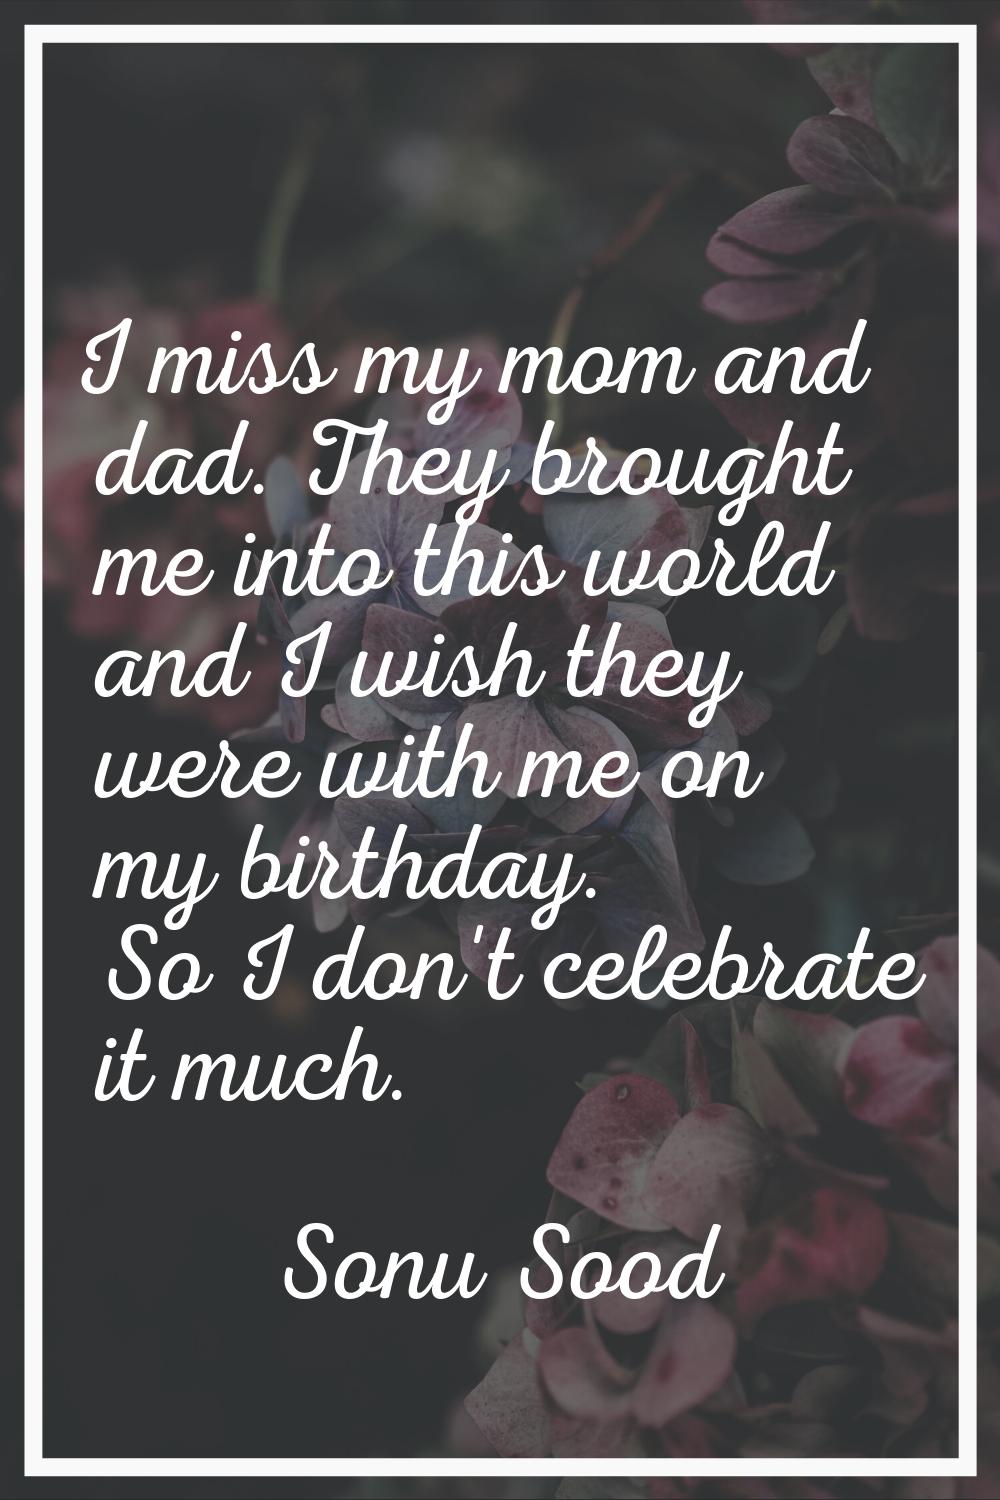 I miss my mom and dad. They brought me into this world and I wish they were with me on my birthday.